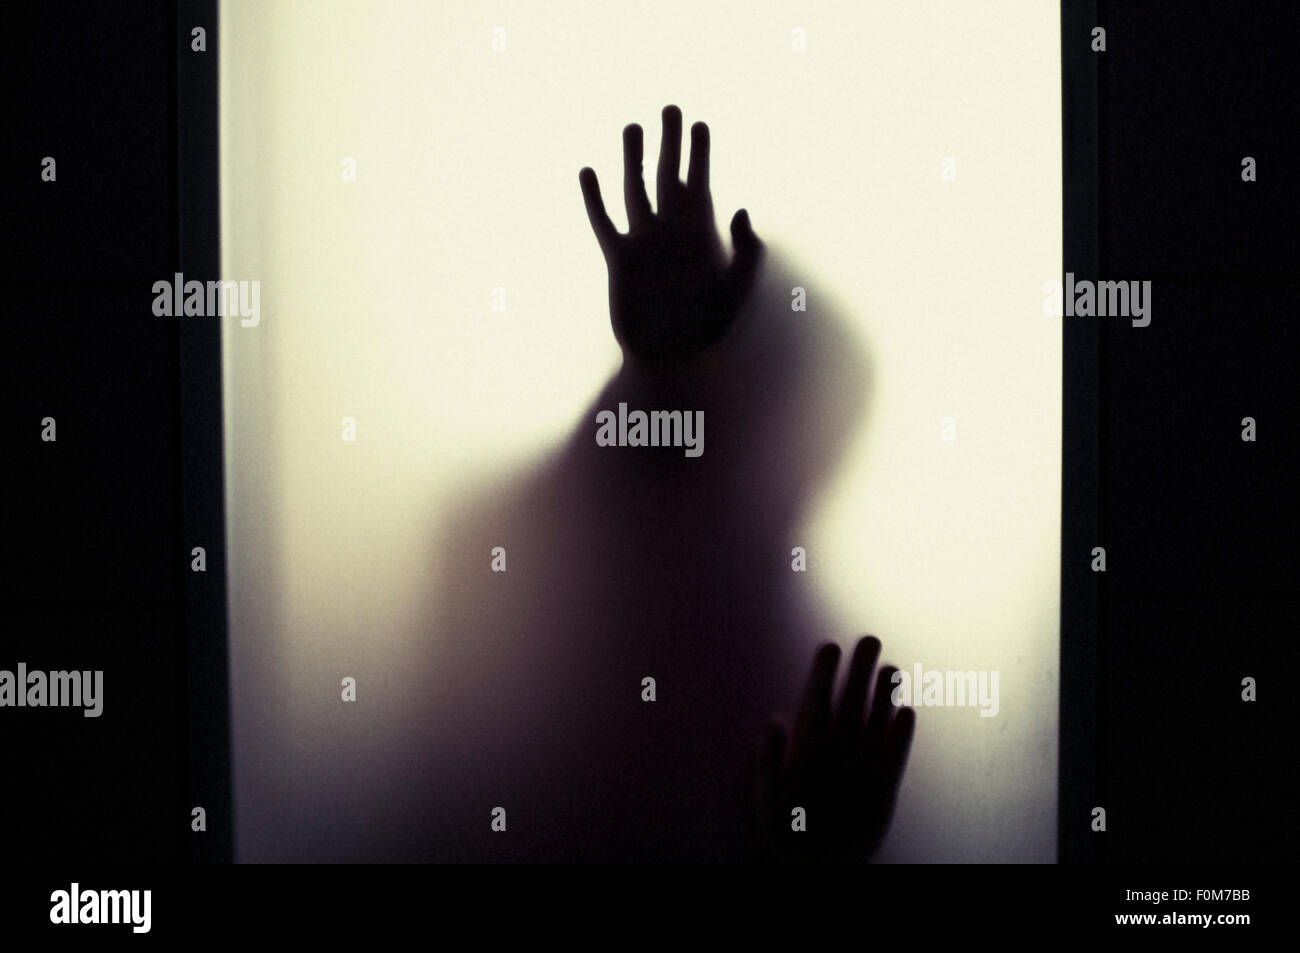 Silhouette of little child holding up hands. Conceptual image of childhood fears, abuse and safety of children. Stock Photo